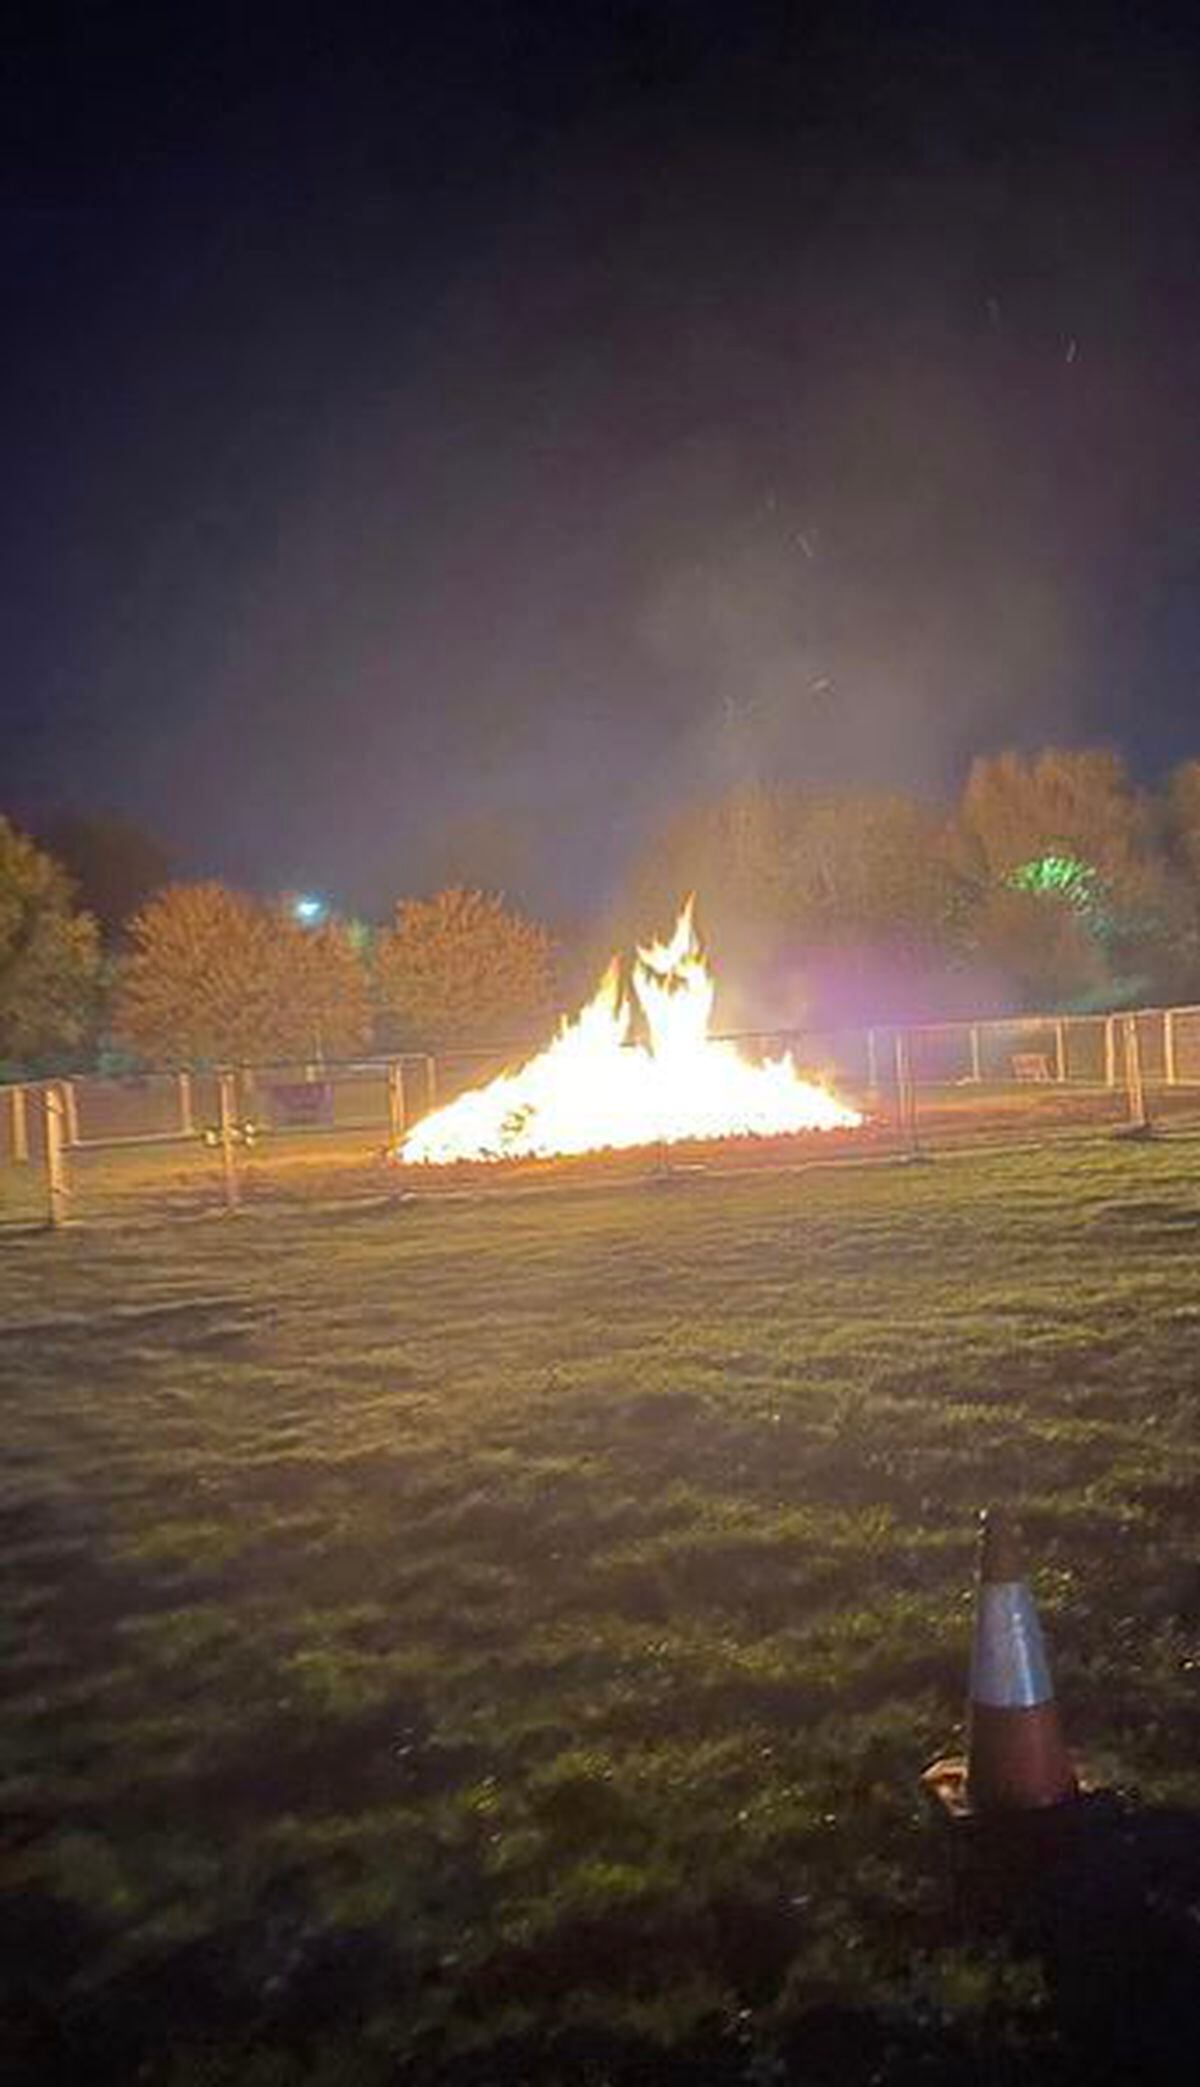 The pallets for the Donnington bonfire were set alight a week before the event. Photo: Cathy Leek